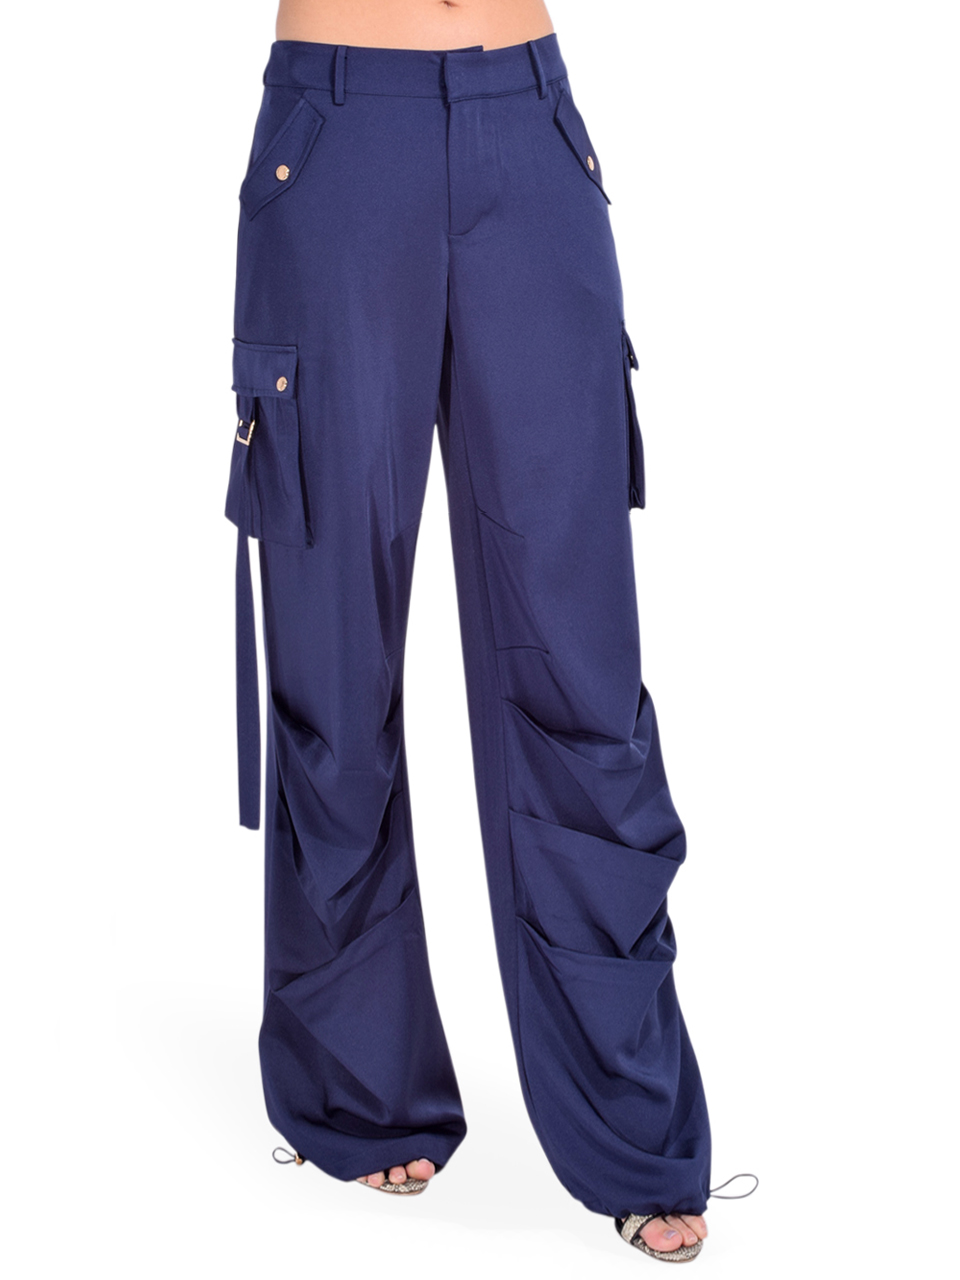 SER.O.YA Lai Satin Cargo Pant in Navy Side View 